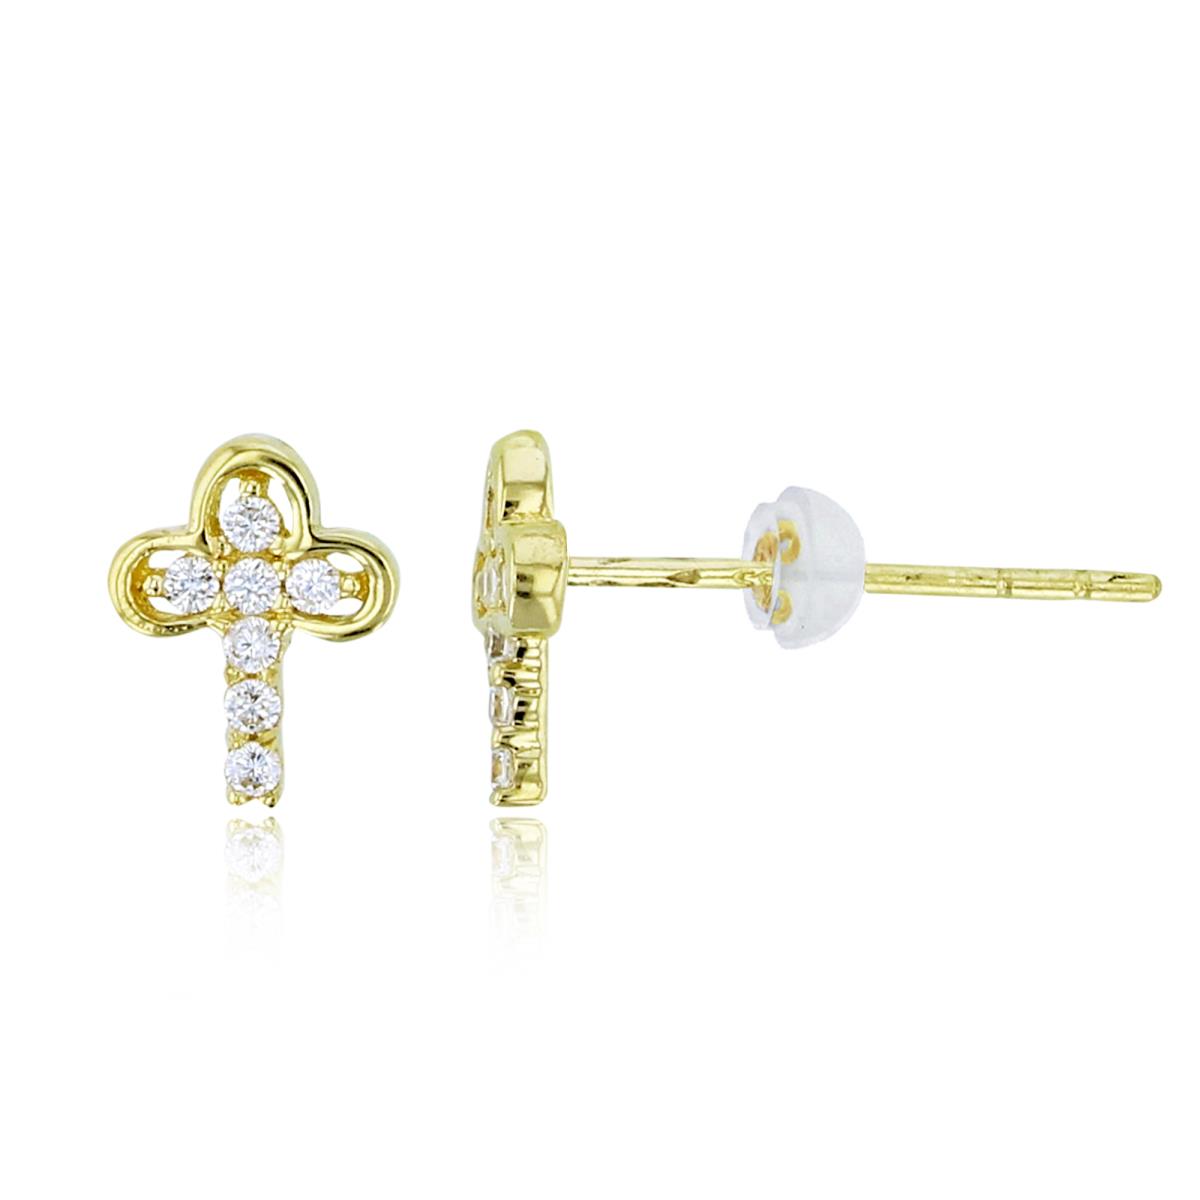 10K Yellow Gold Rnd CZ Cross Studs with Silicon Backs